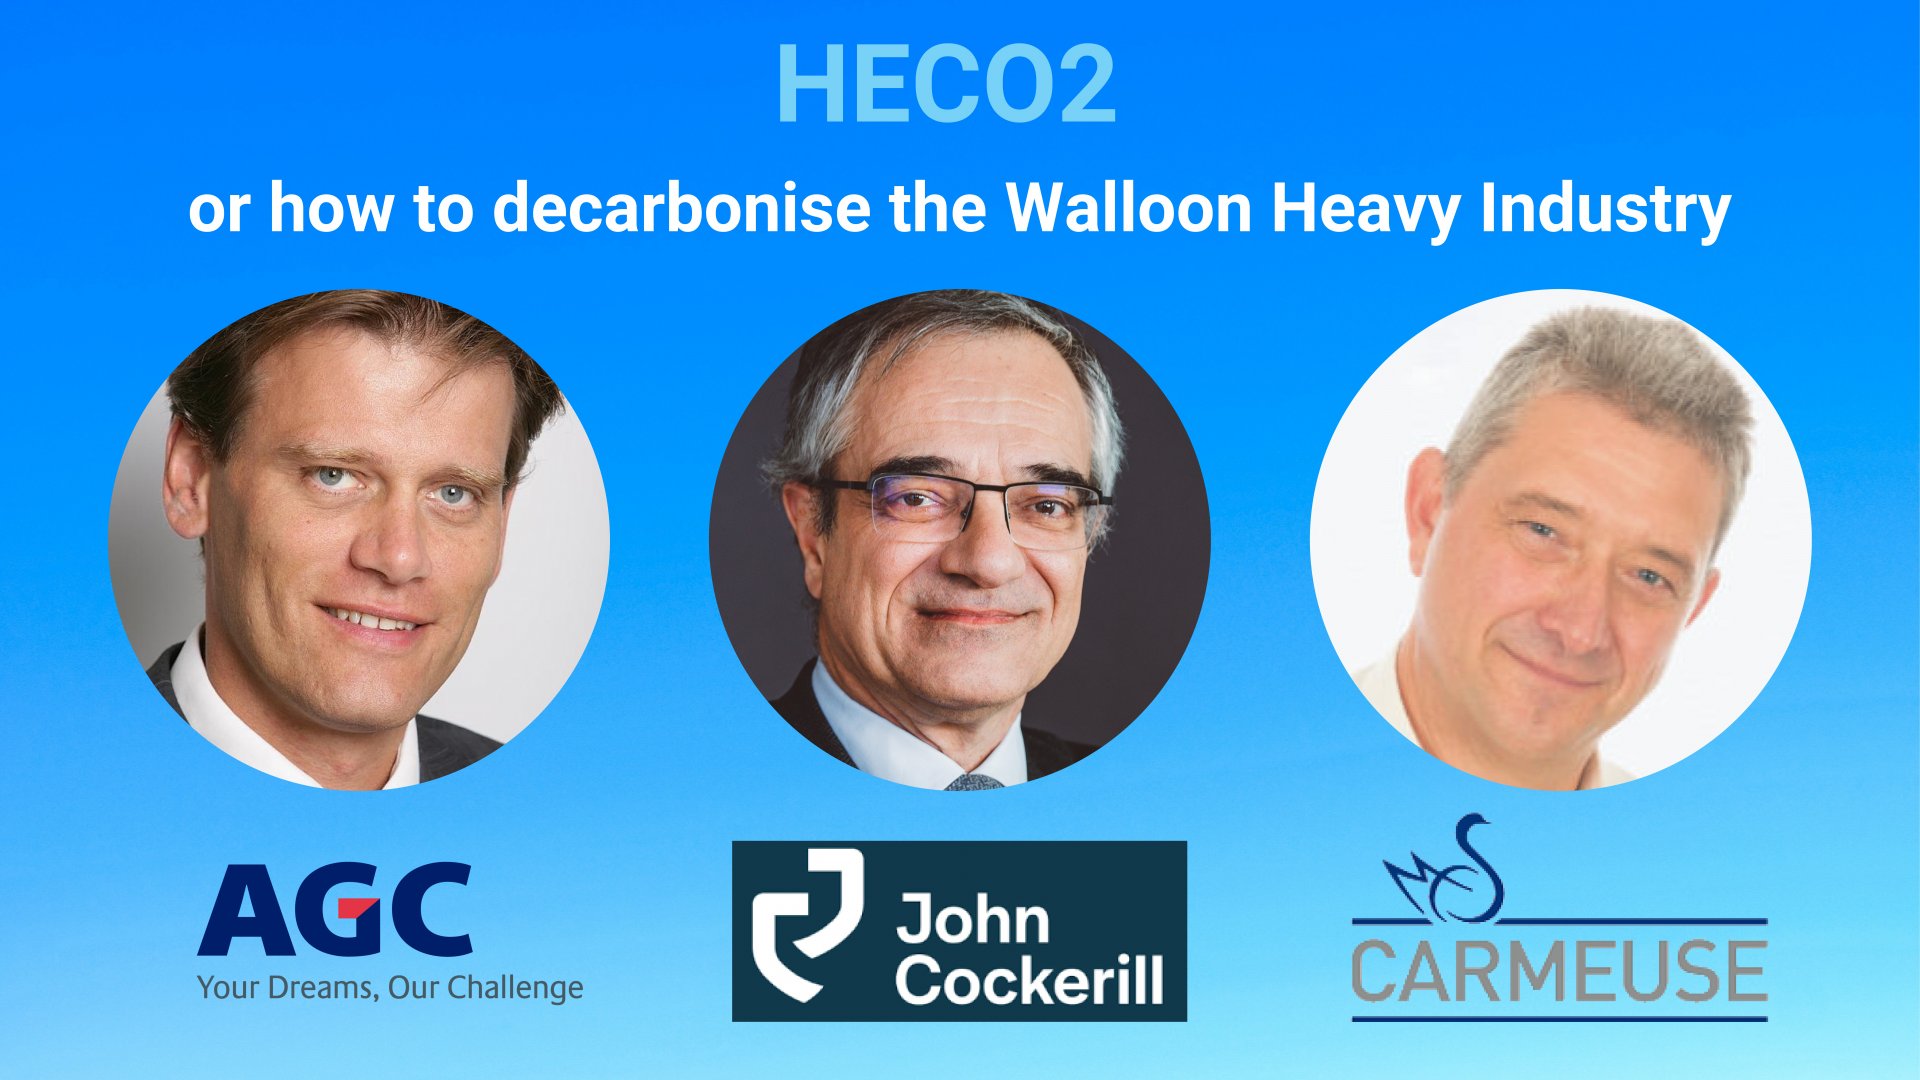 HECO2: find out how the Walloon Heavy Industry will decarbonise thanks to a bold collective initiative